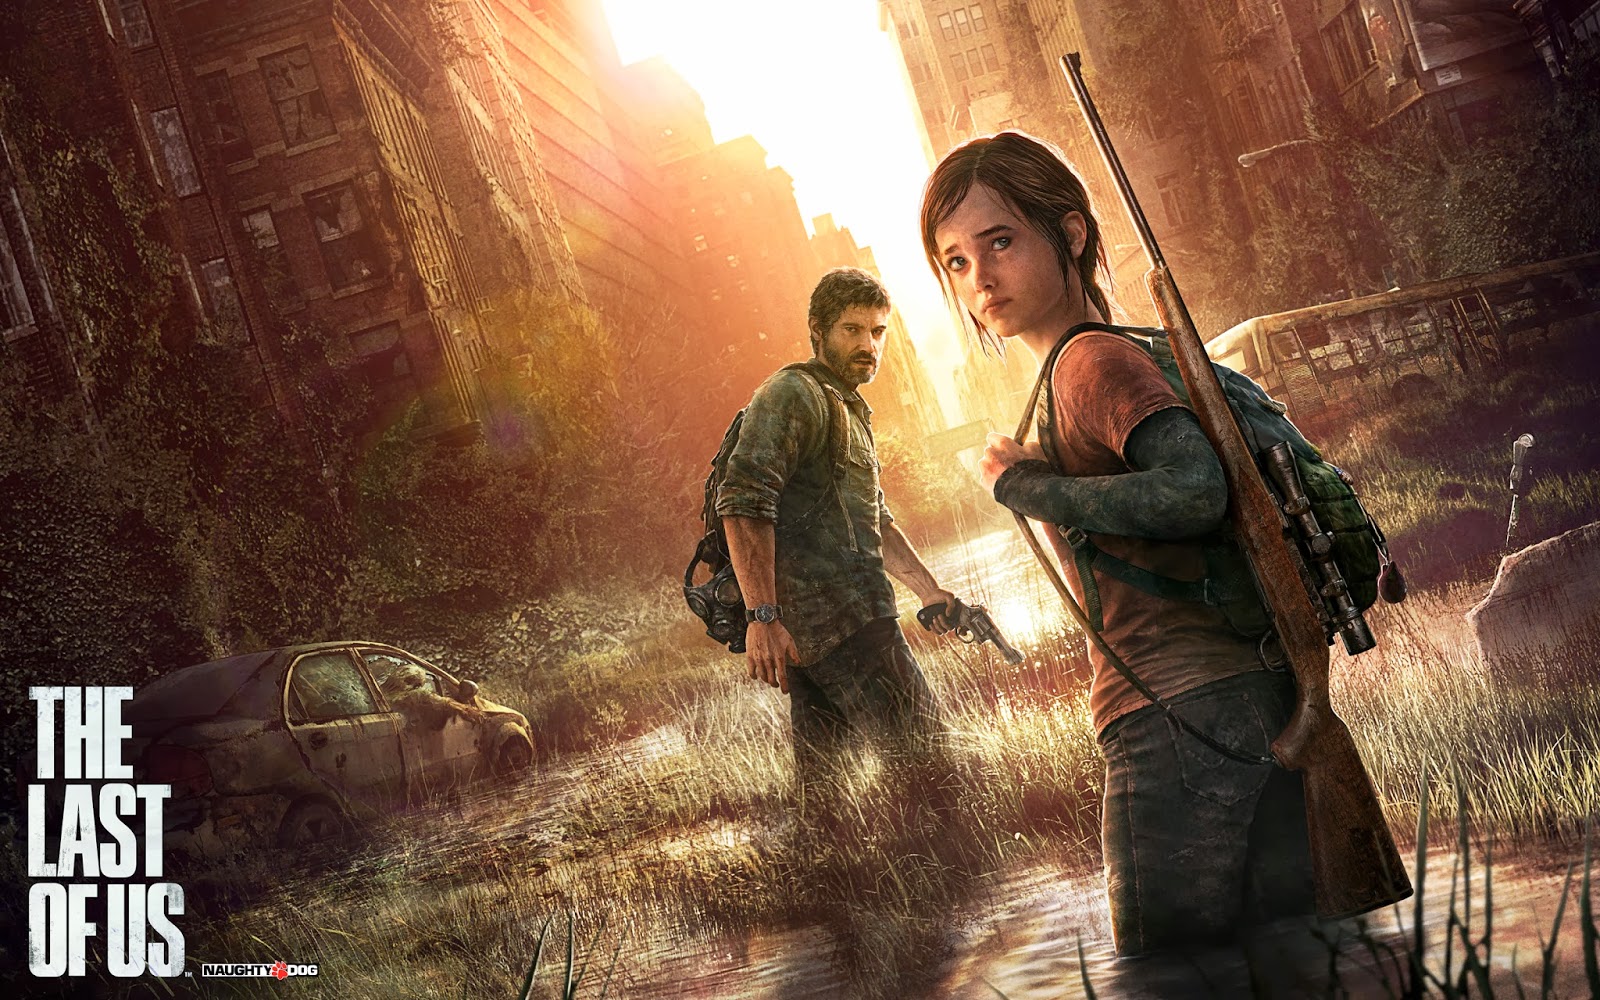 The Last of Us - PlayStation 3